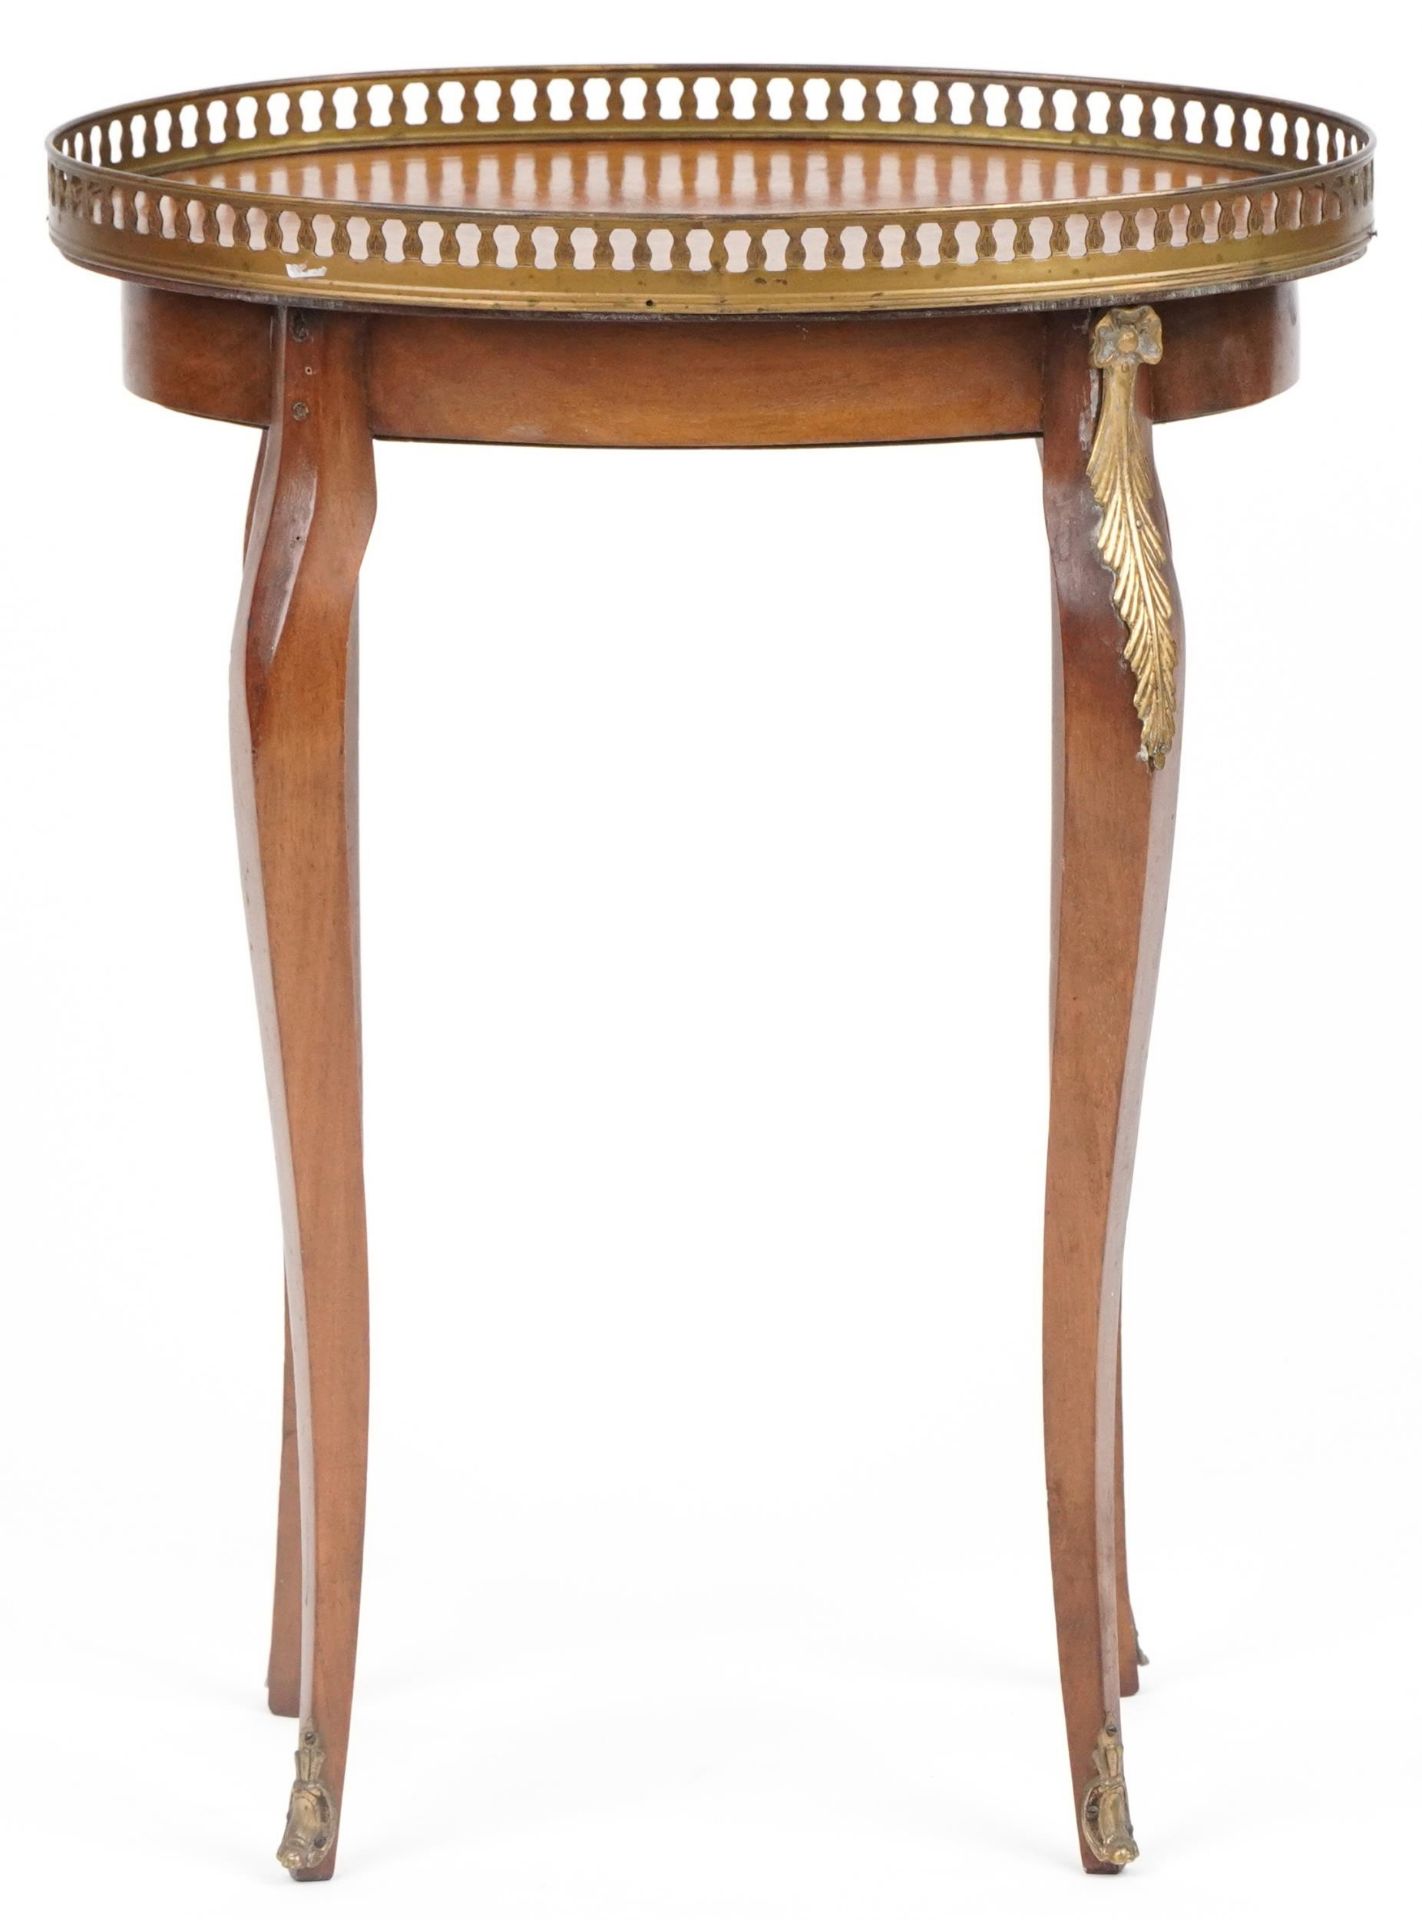 French inlaid kingwood side table with oval top having an engraved brass gallery, 59.5cm x 46cm W - Image 4 of 5